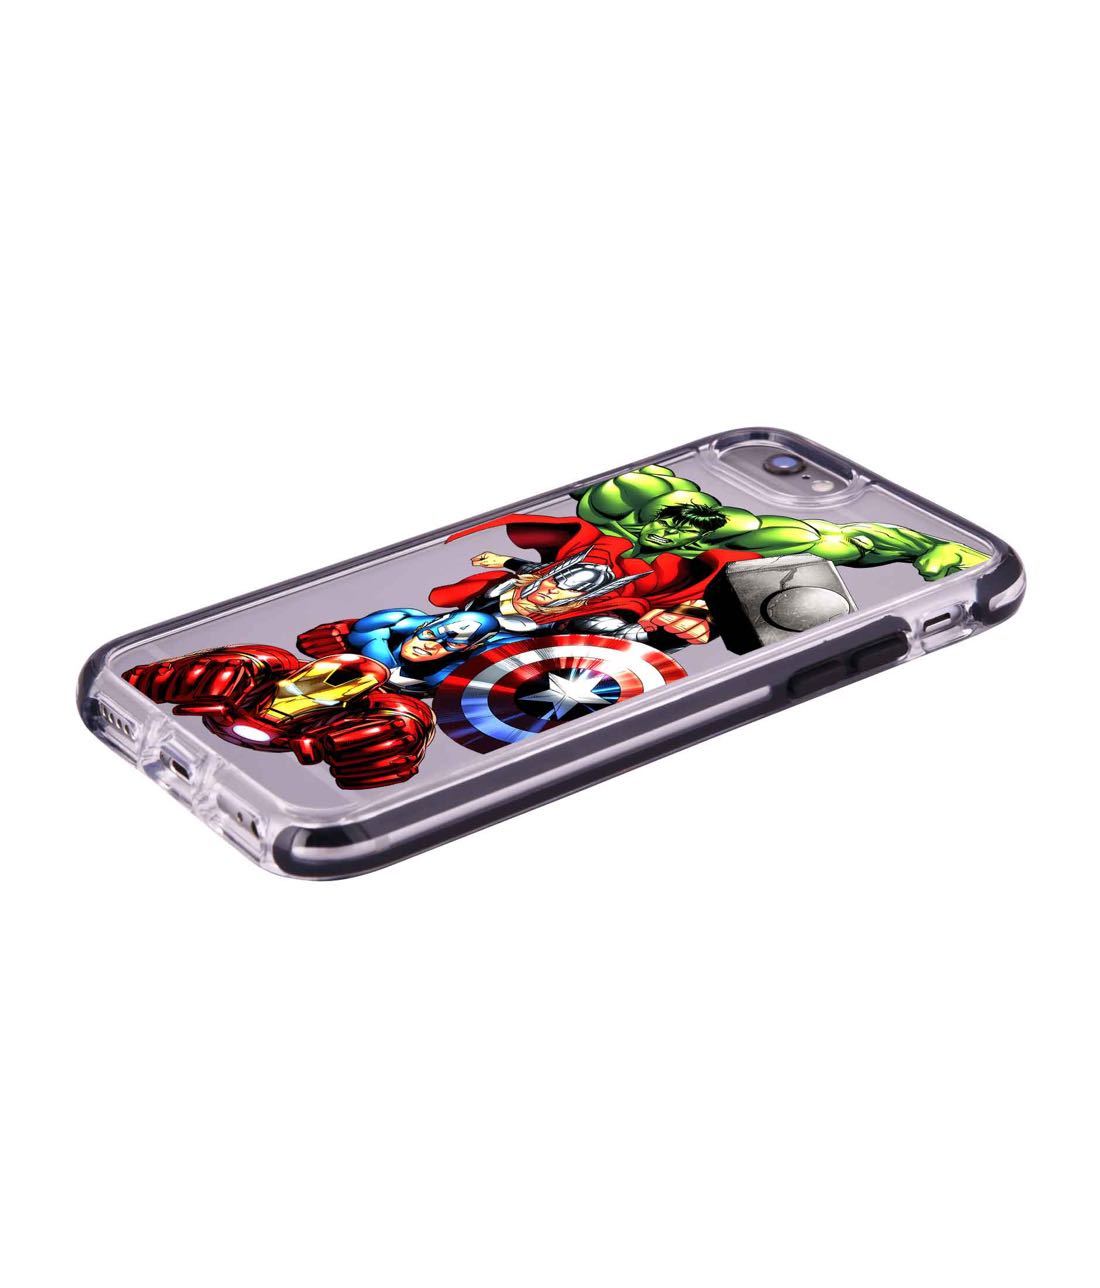 Avengers Fury - Extreme Phone Case for iPhone 6S